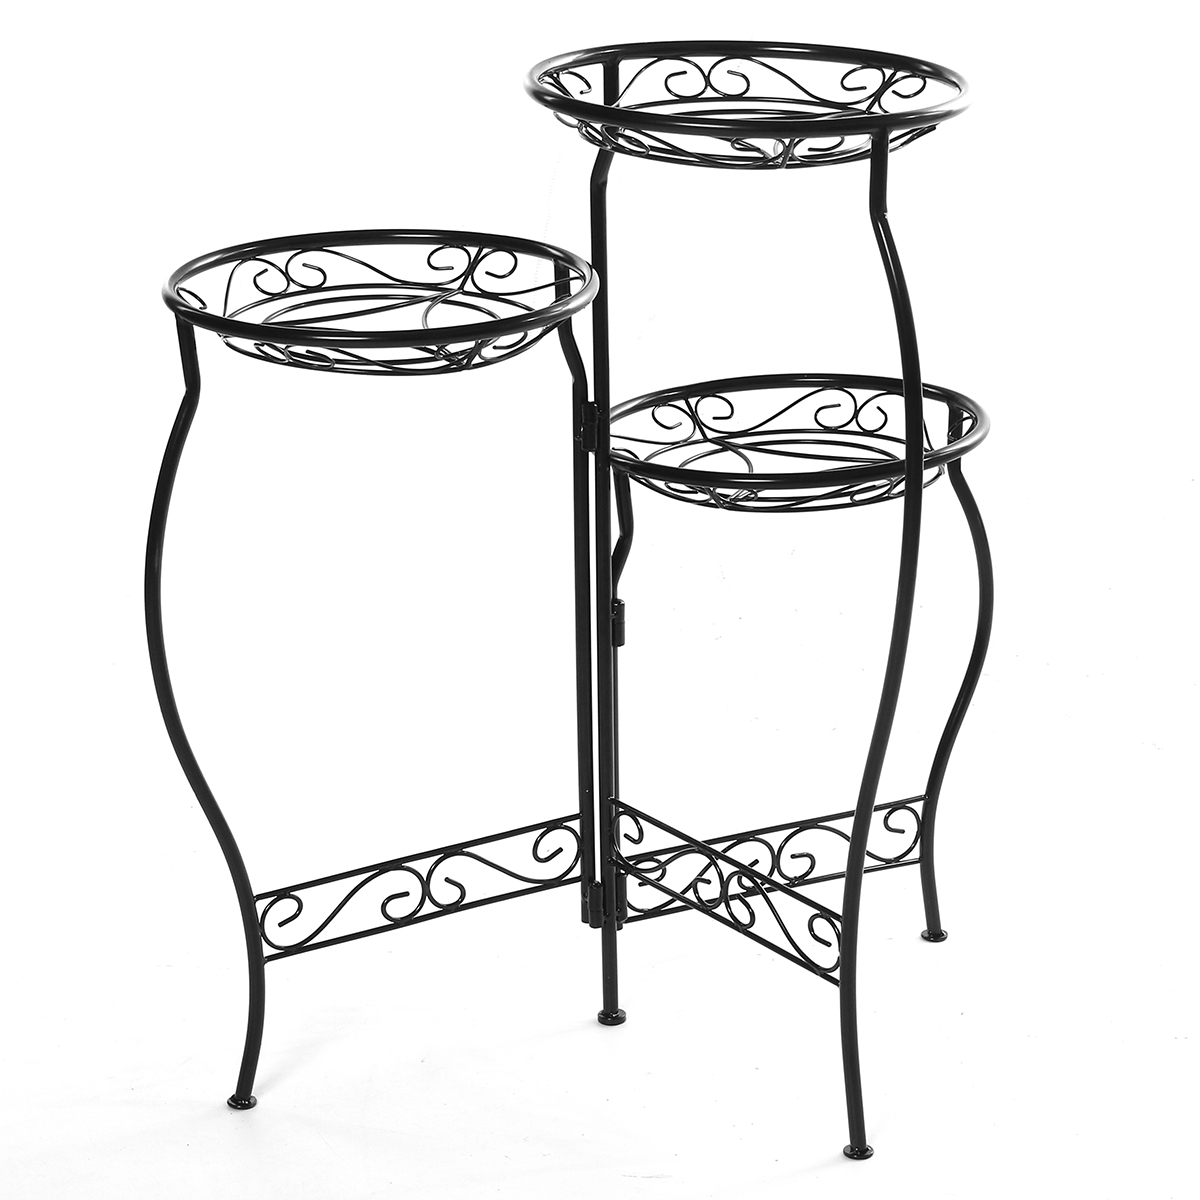 Metal-Flower-Pot-Stand-3-Tiers-Rounded-Plant--Holder-Indoor-Outdoor-Flower-Plant-Stand-Displaying-Ra-1797075-10